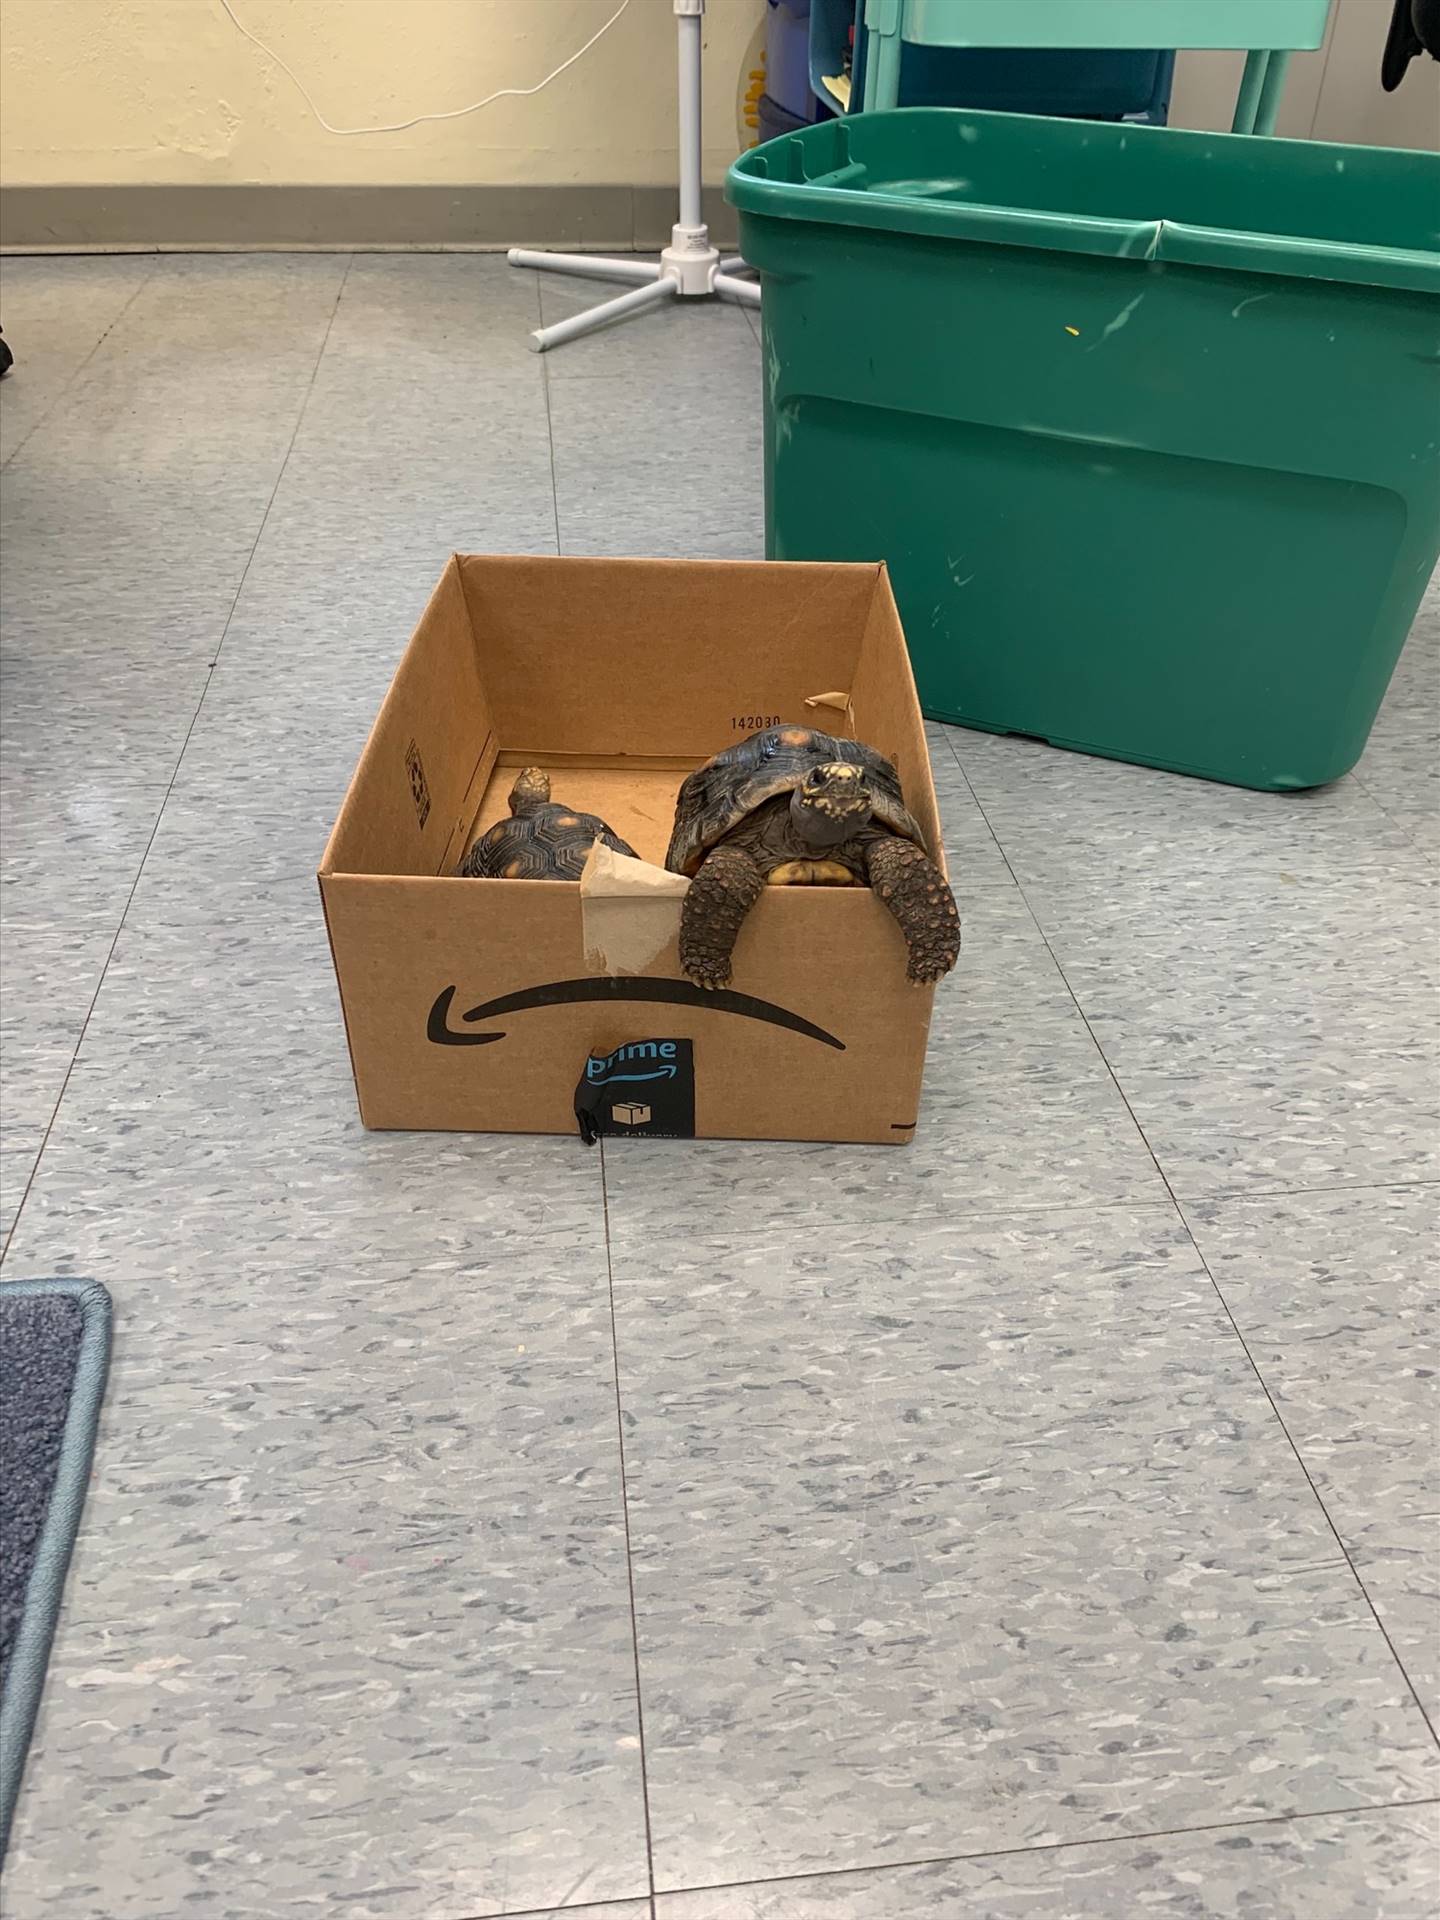 2 tortoises escaping from a box